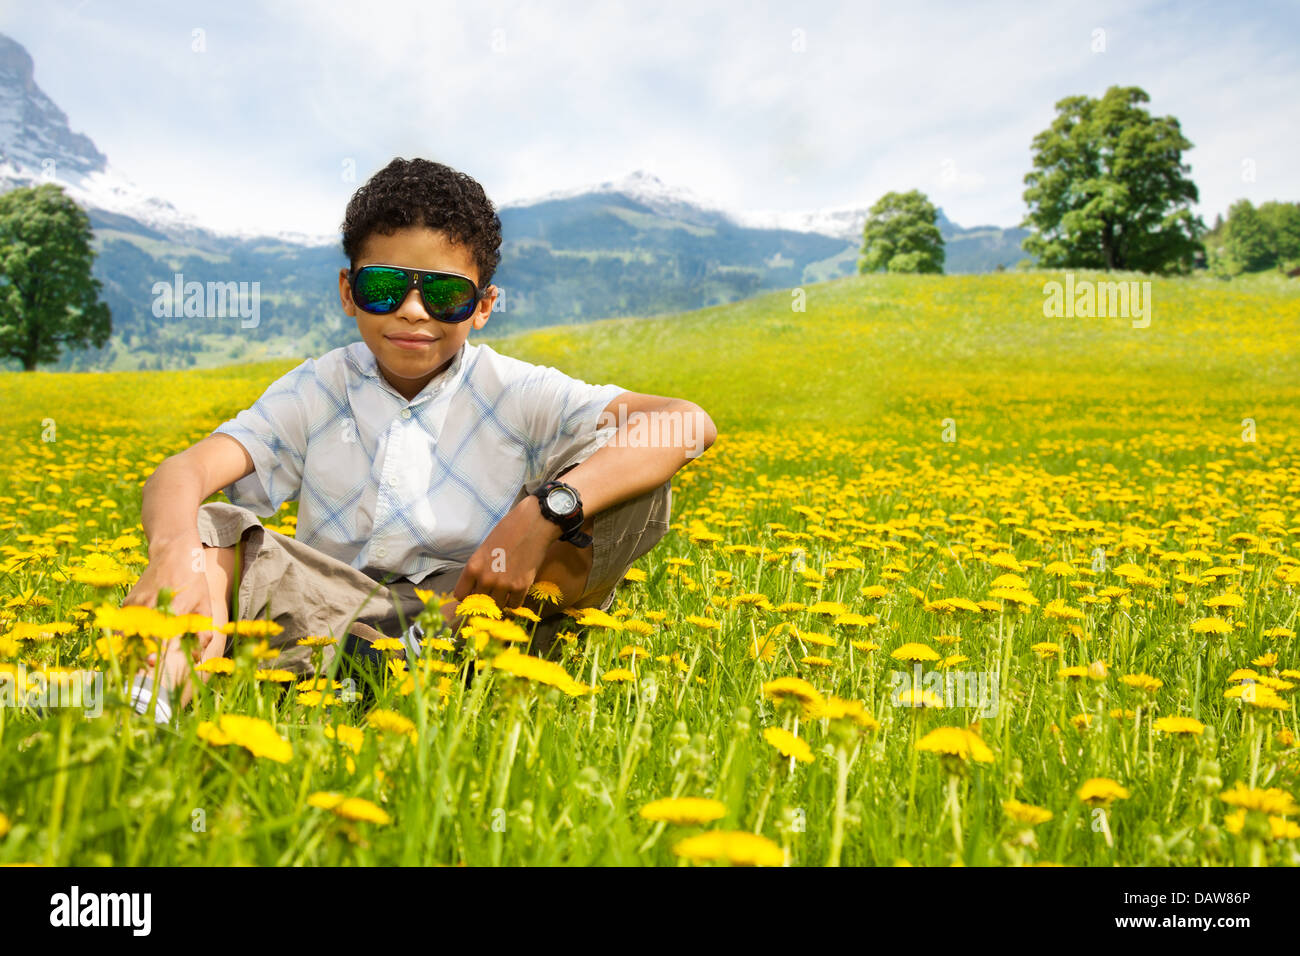 Happy little black boy in sunglasses sitting in the dandelion field with mountains on background Stock Photo